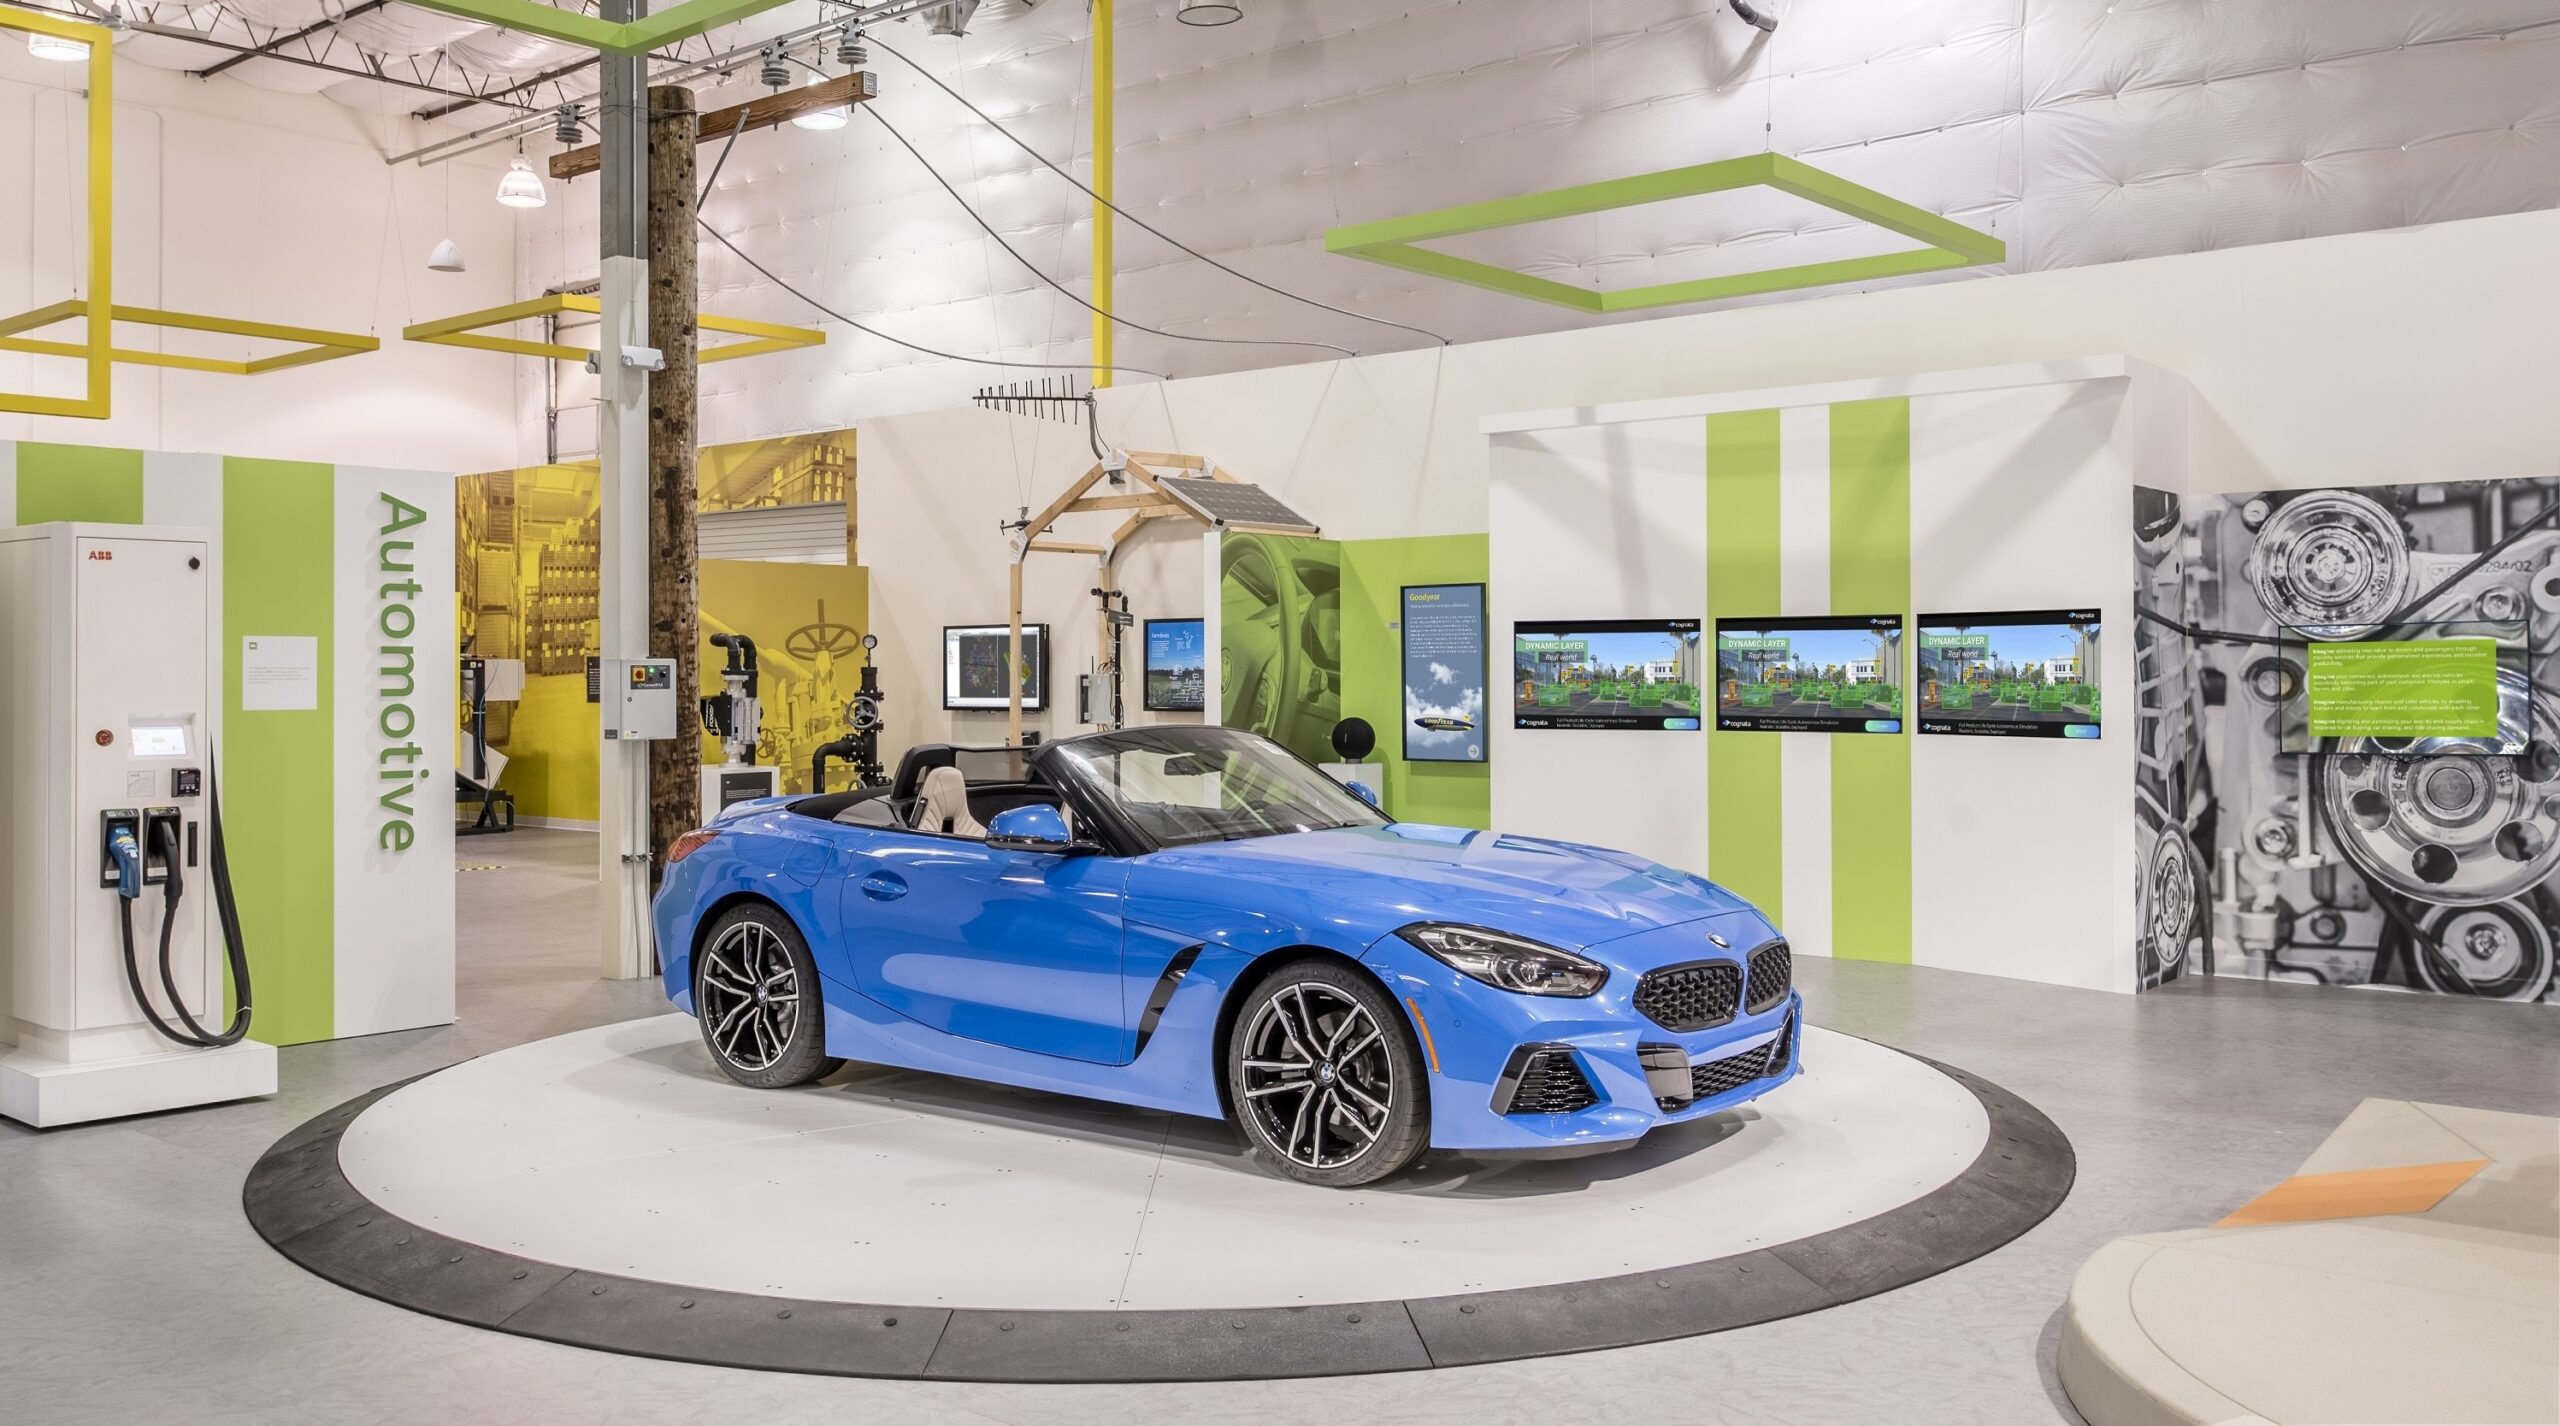 Photo of a blue BMW car inside Microsoft's Industry Experience Center in Redmond, Washington.